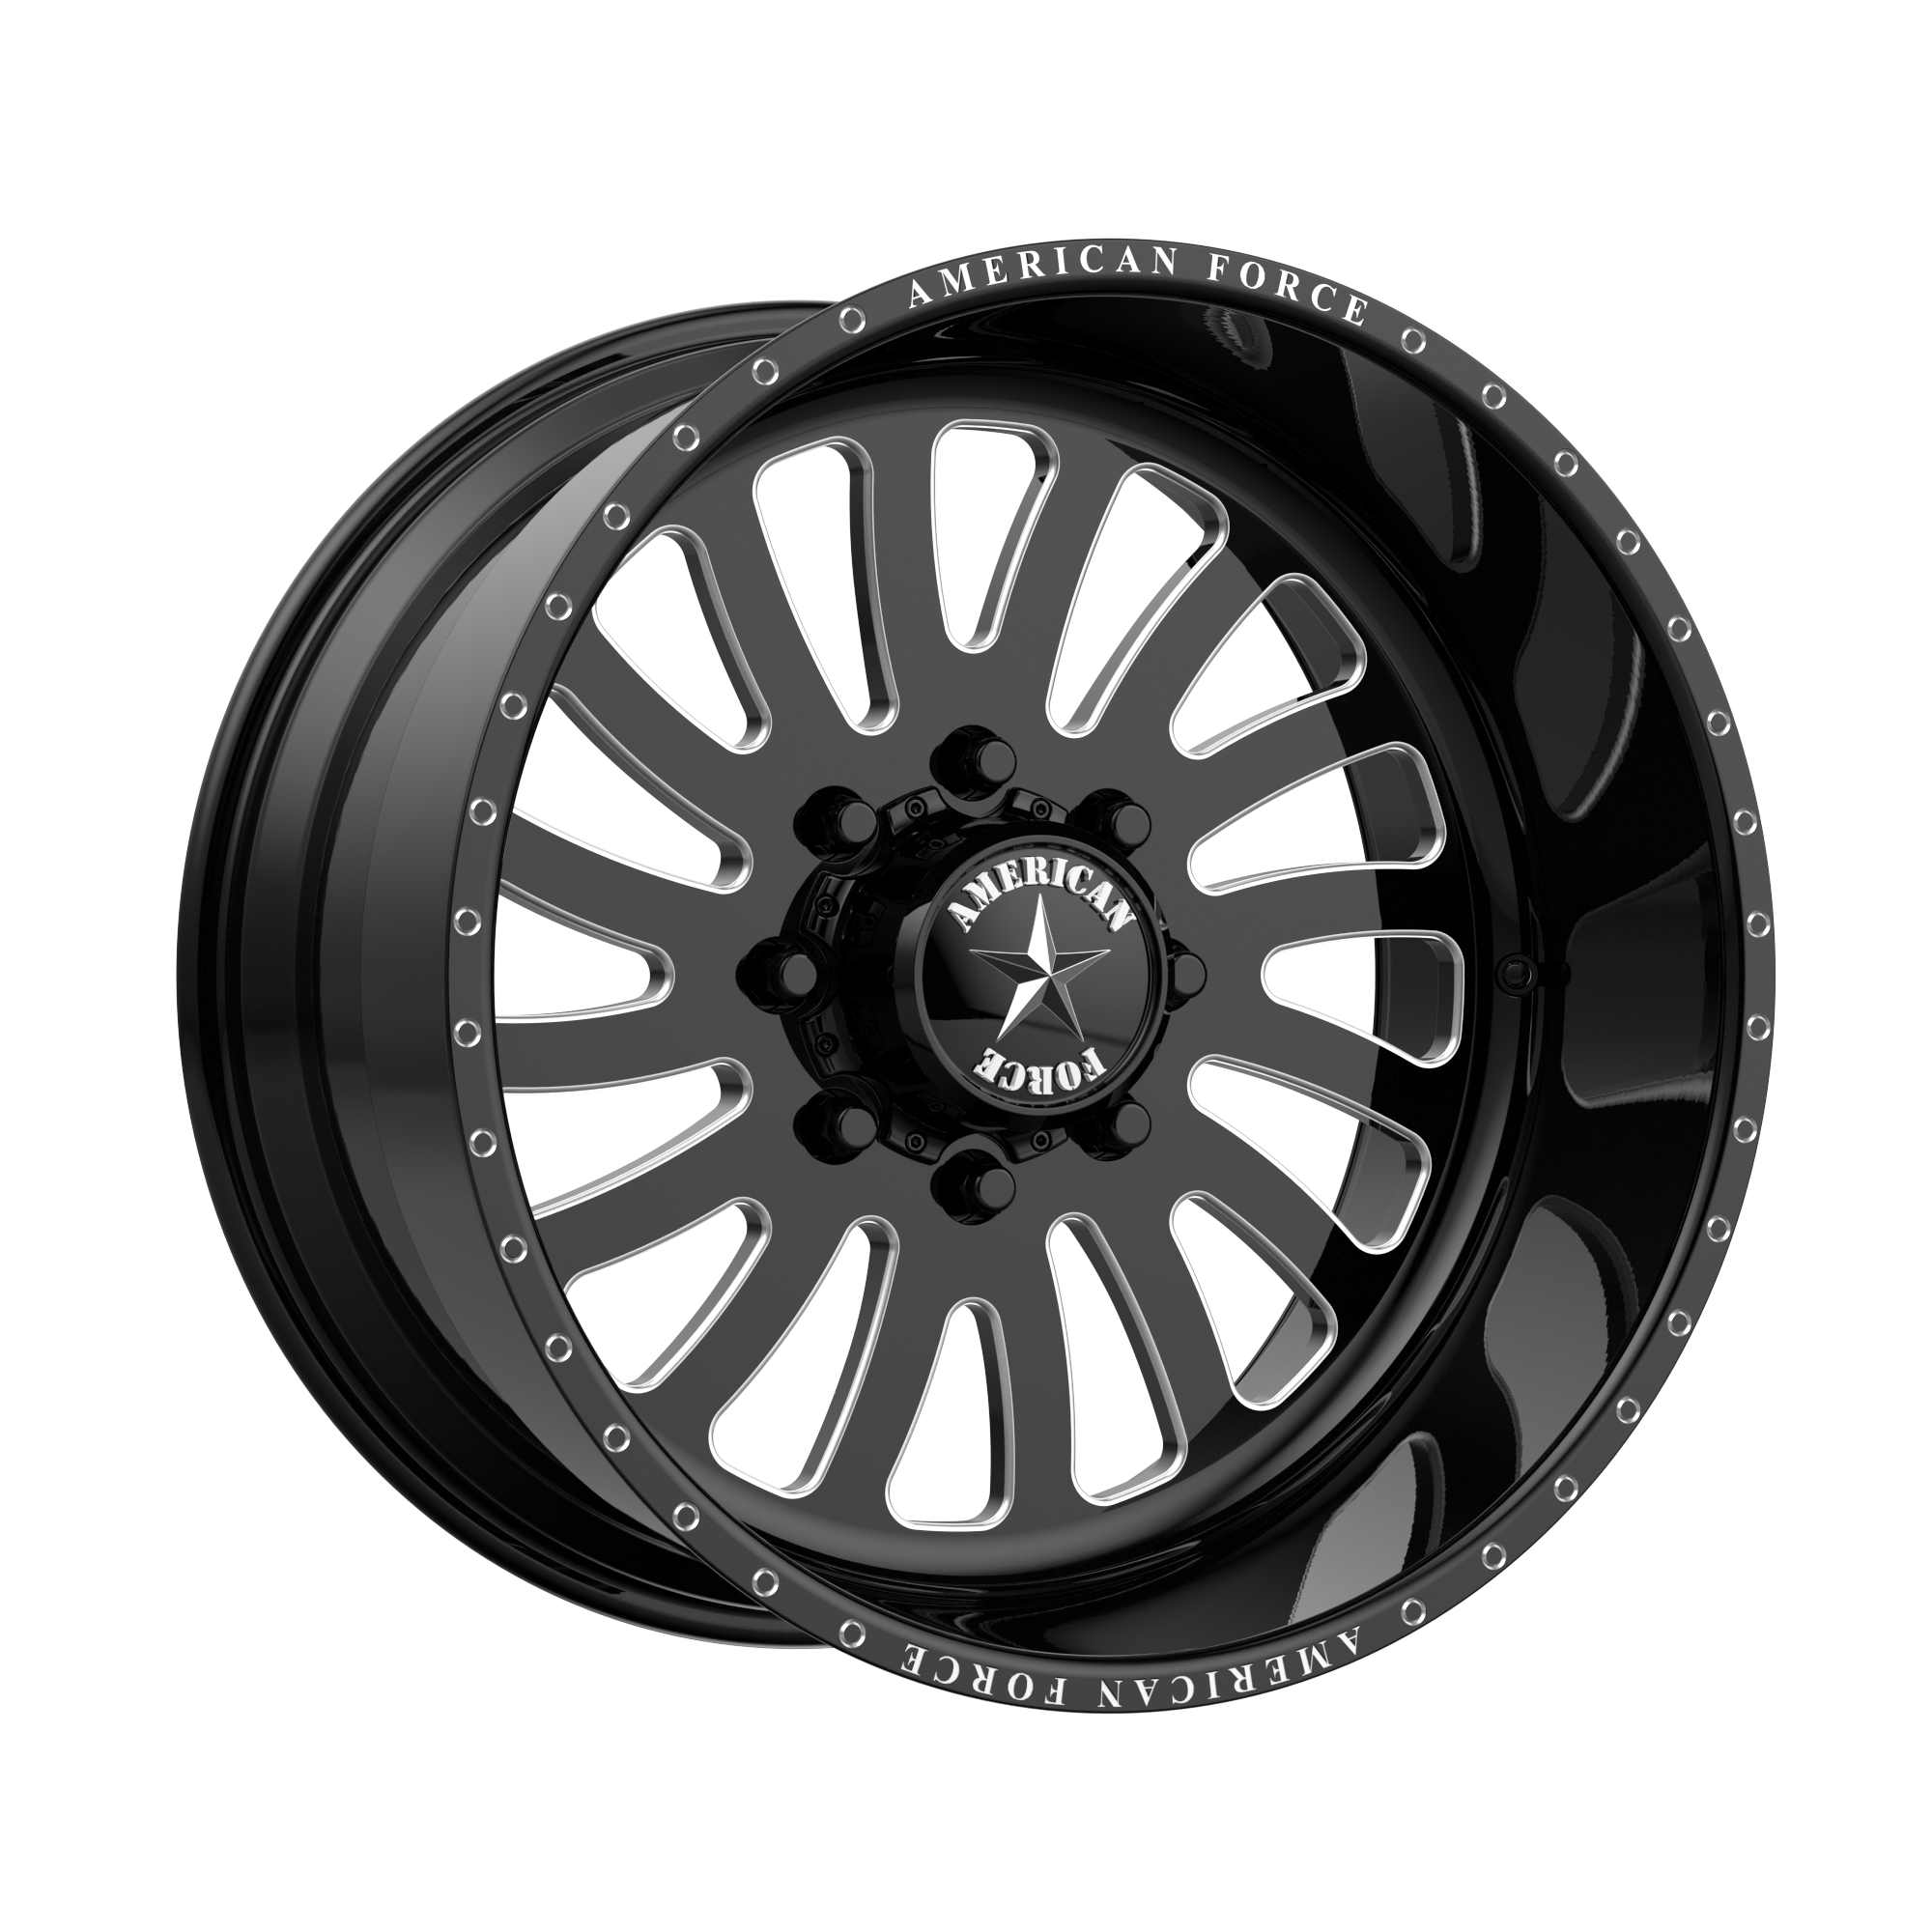 OCTANE SS 20x14 8x170.00 GLOSS BLACK MACHINED (-73 mm) - Tires and Engine Performance